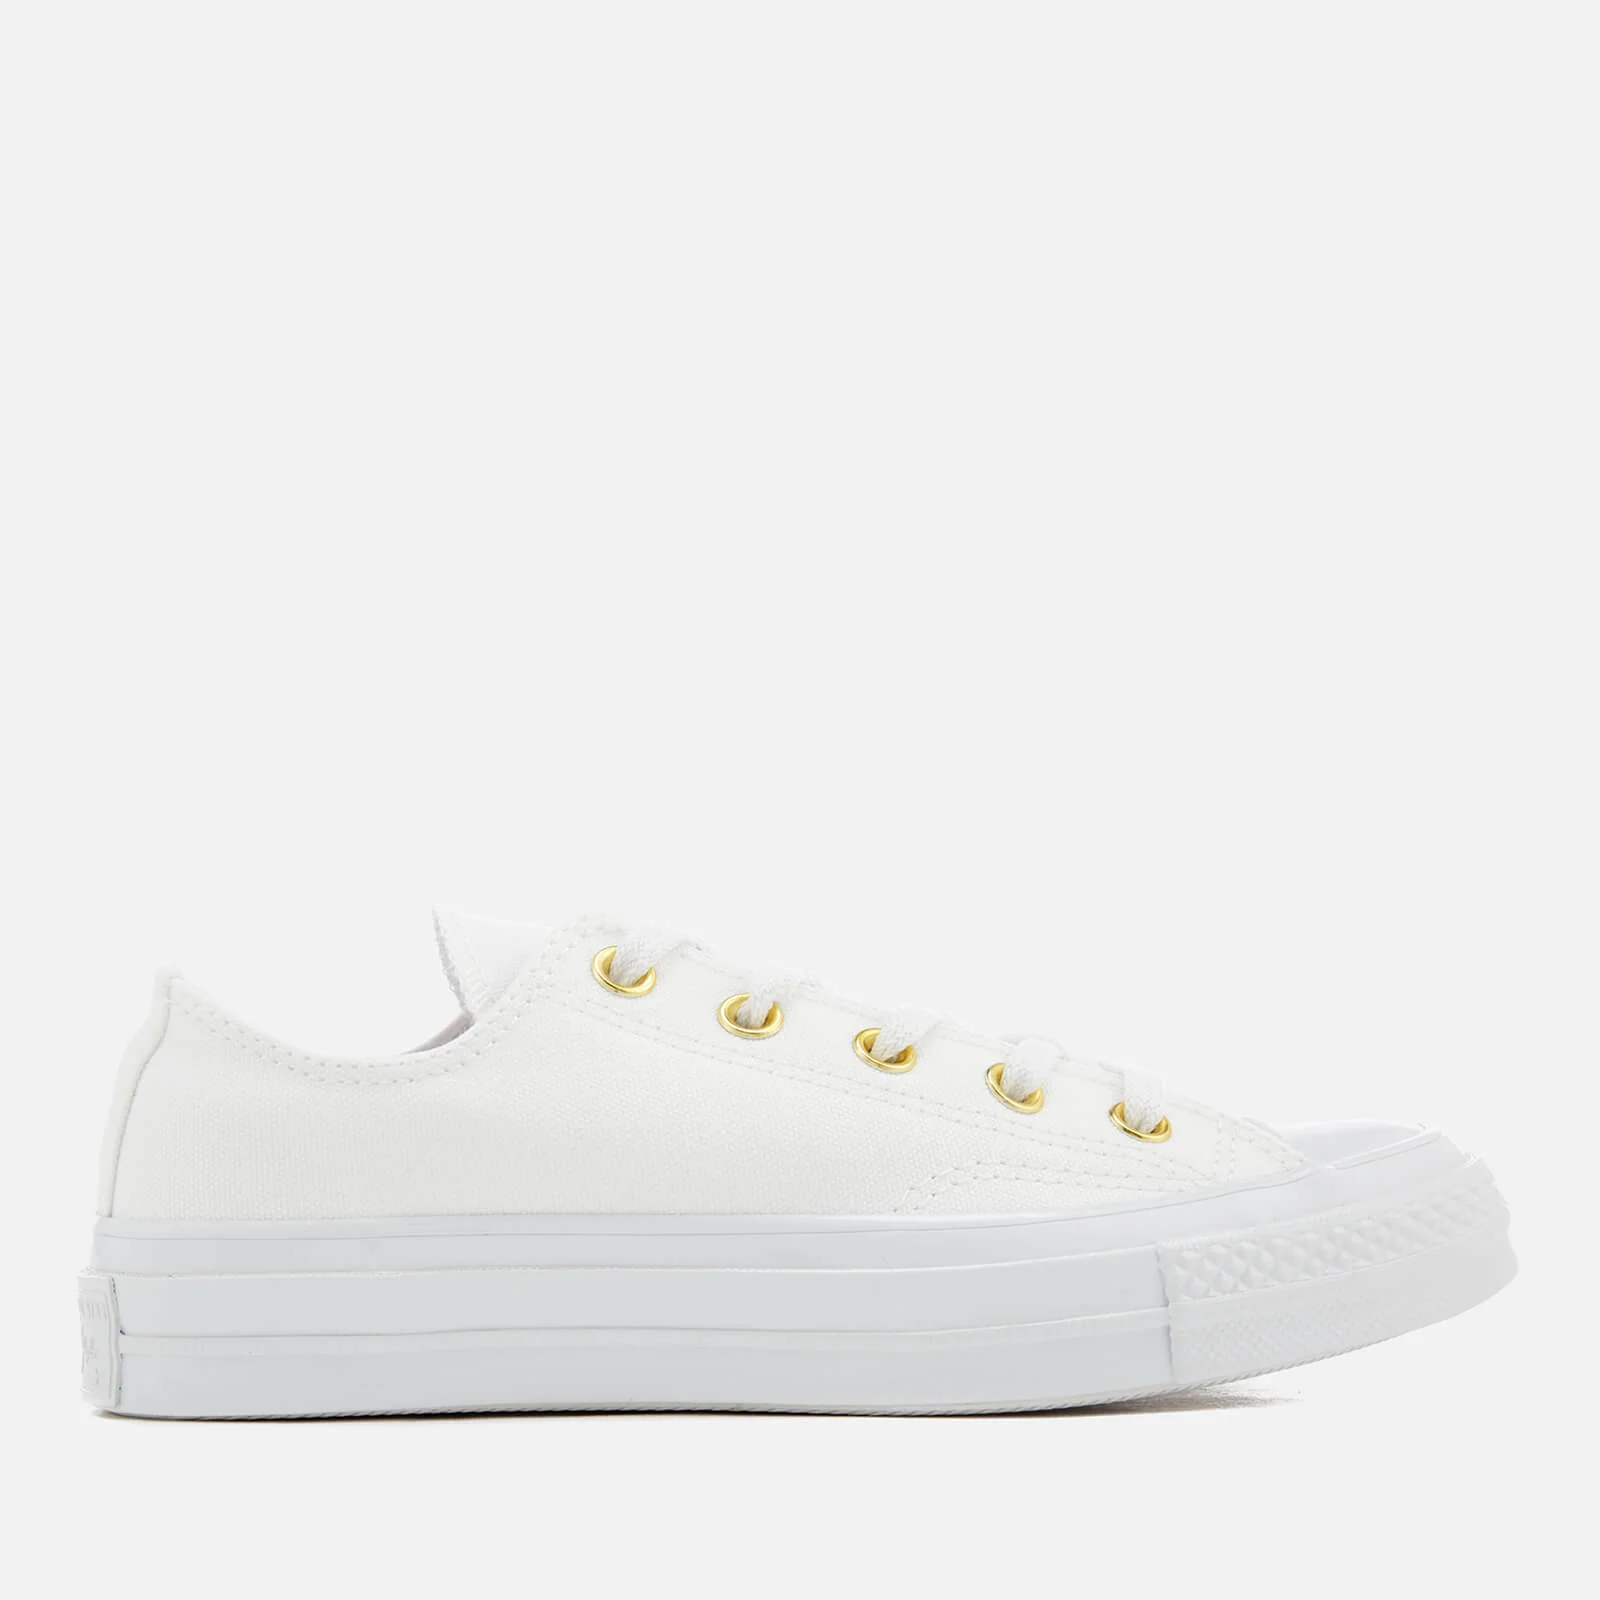 Converse Women's Chuck Taylor All Star '70 Ox Trainers - White/White/Cherry Blossom Image 1